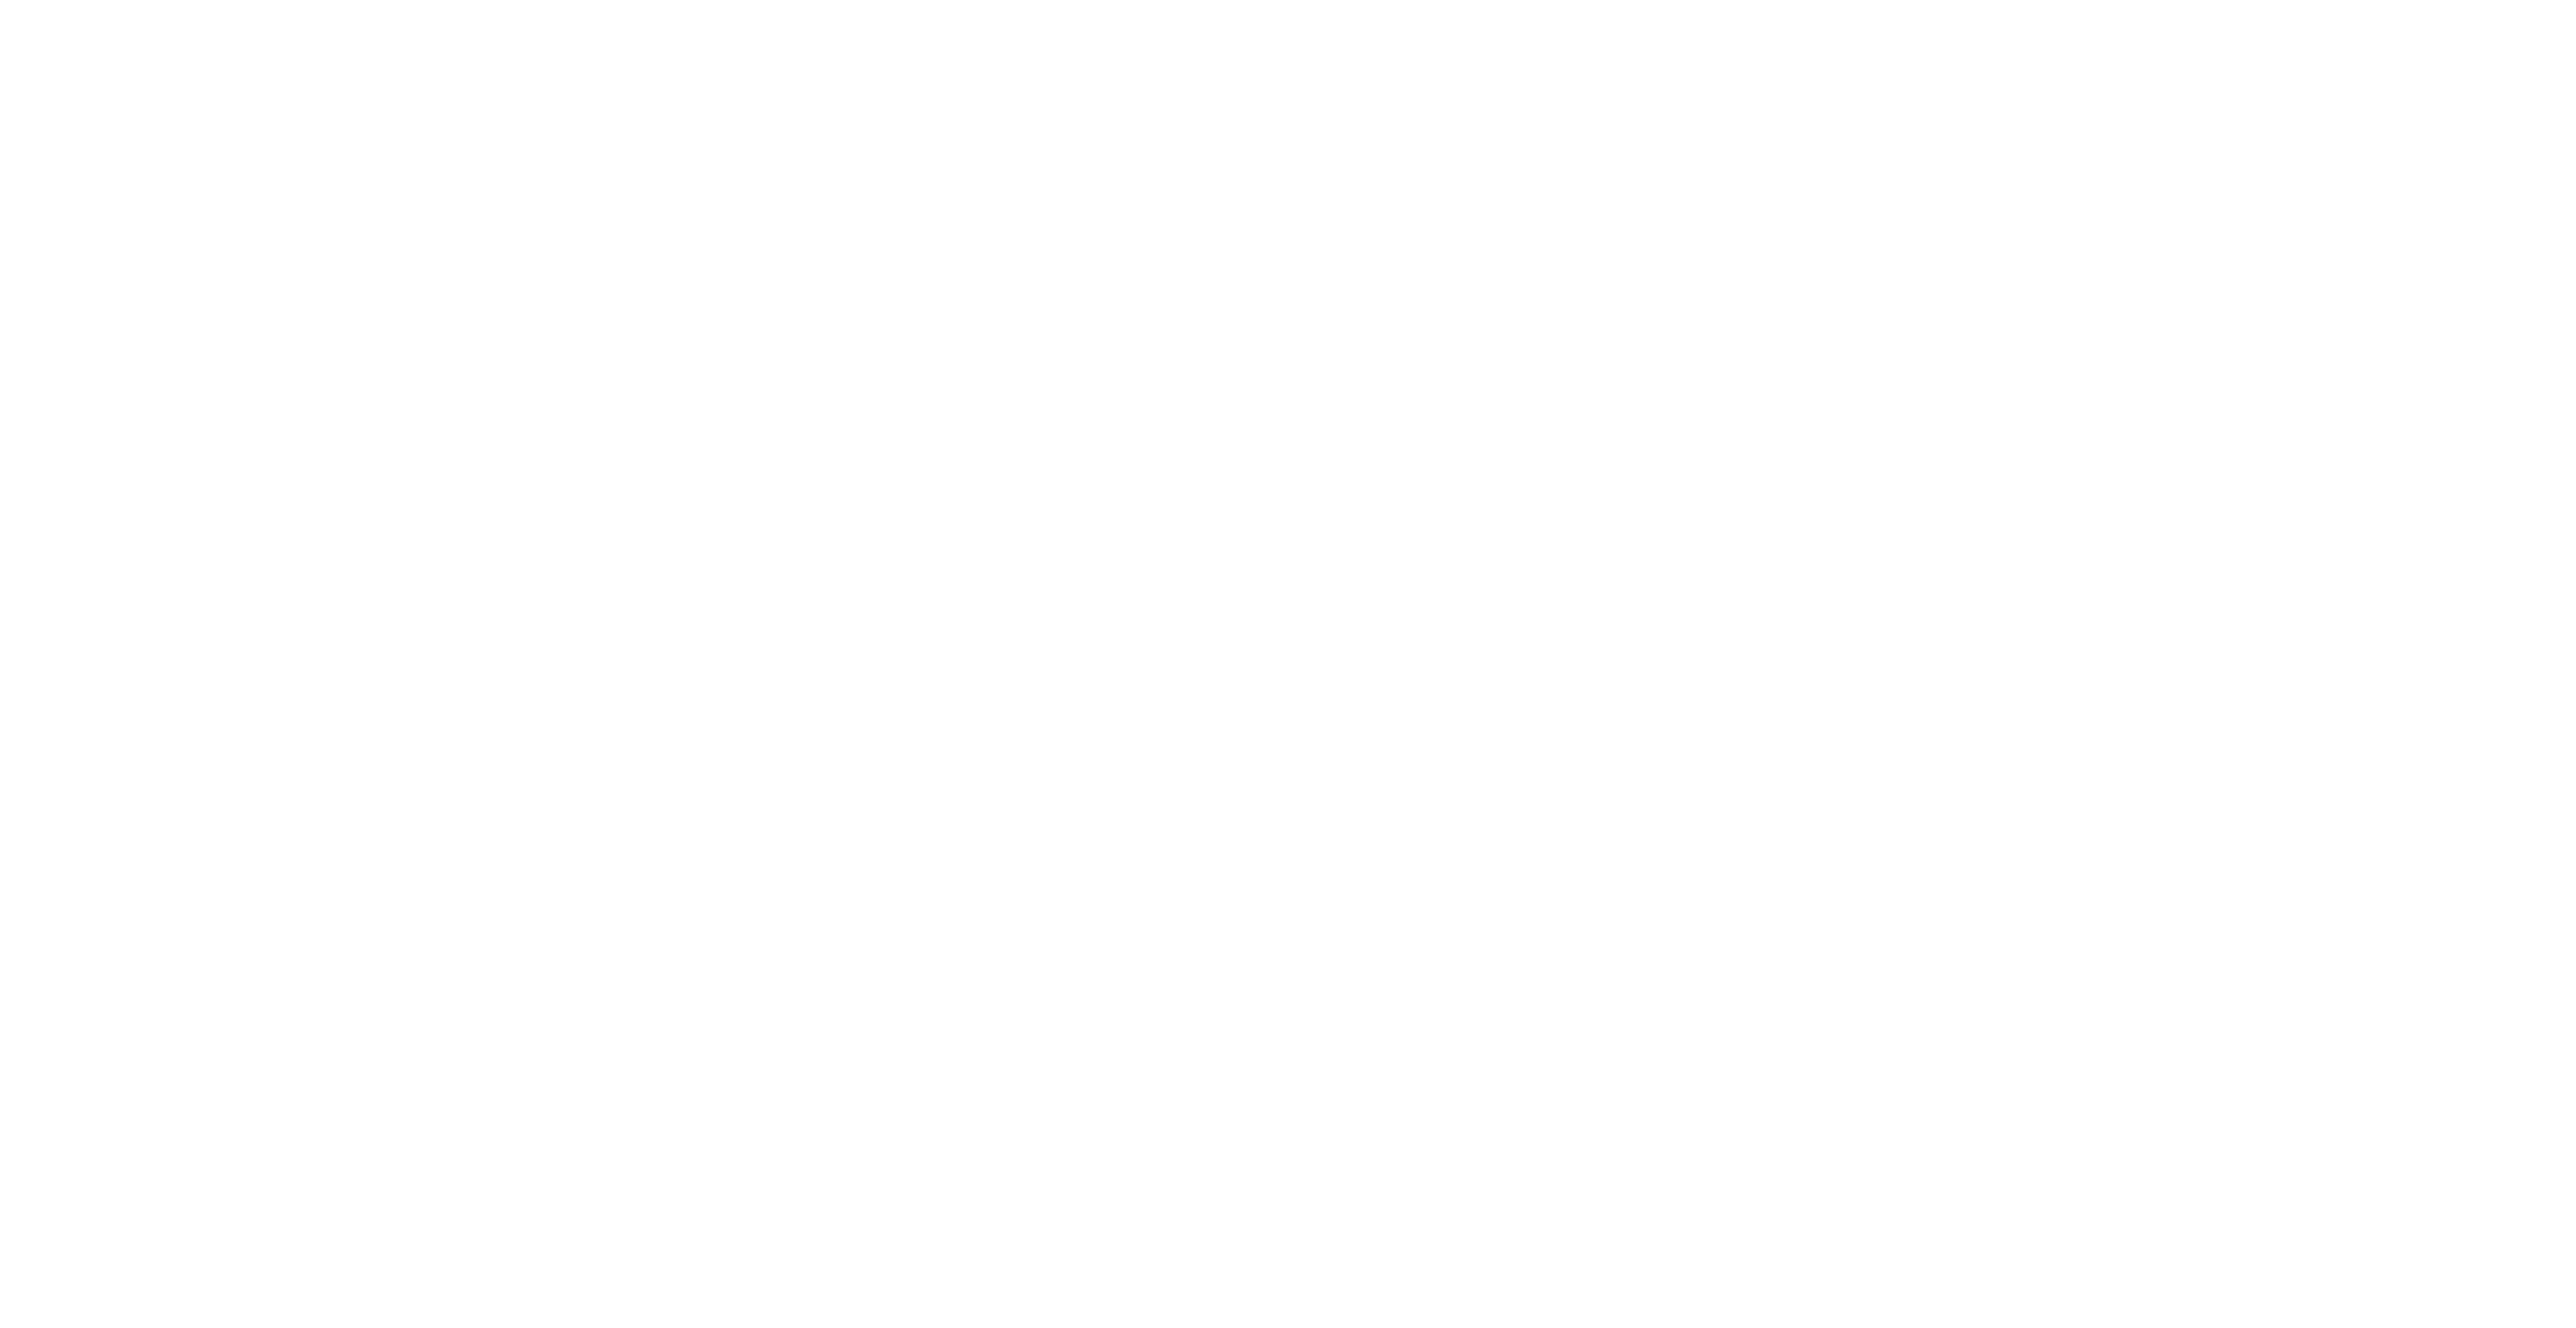 youthnet.business